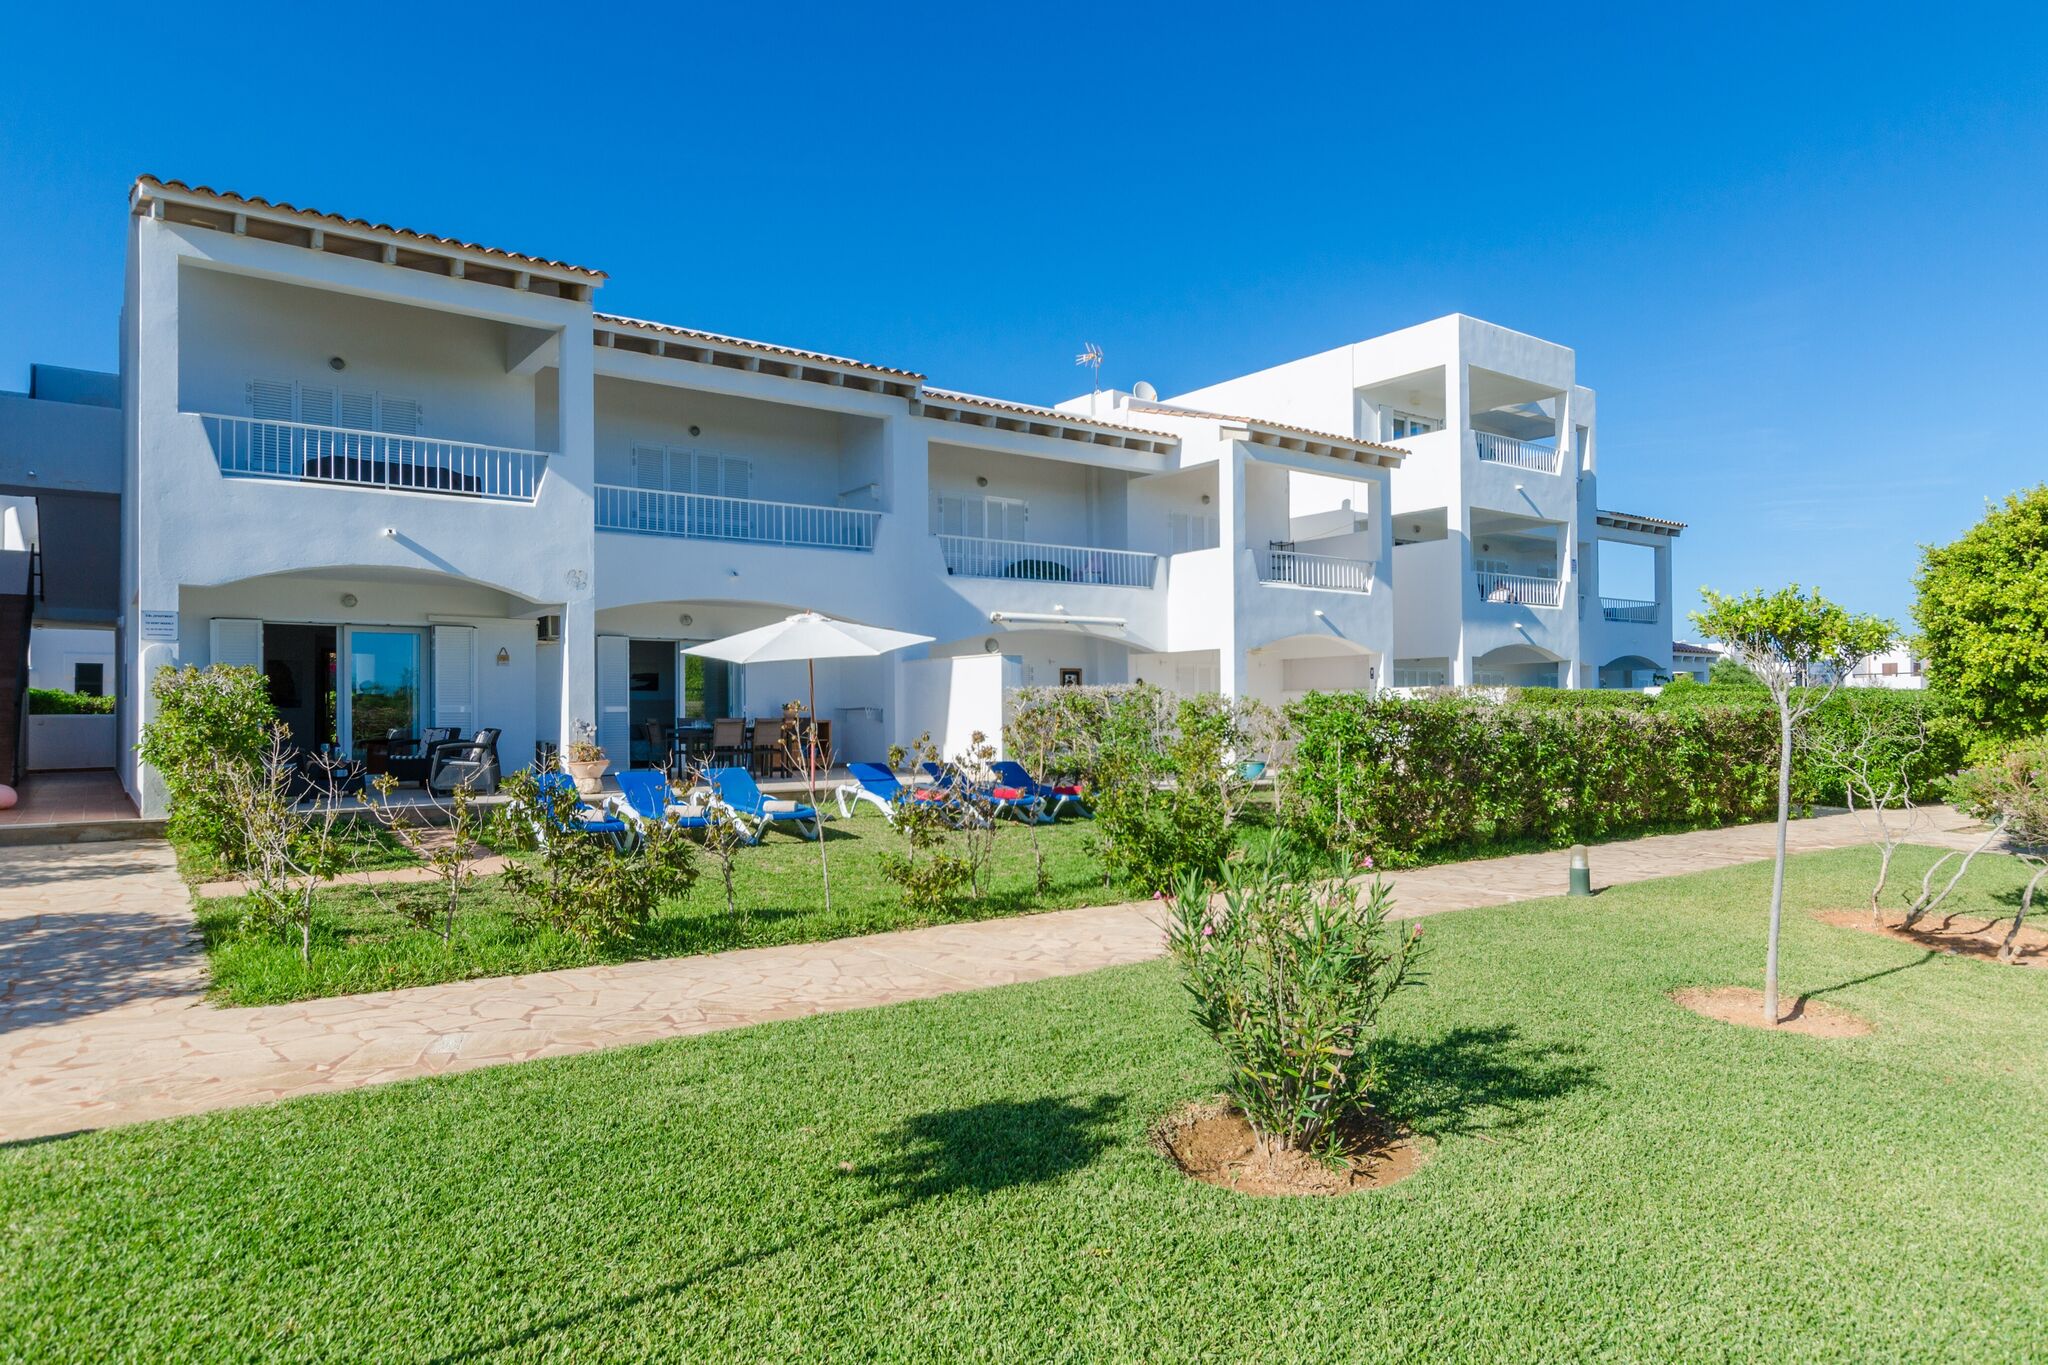 CELESTE - Apartment for 6 people in Cala d'or.